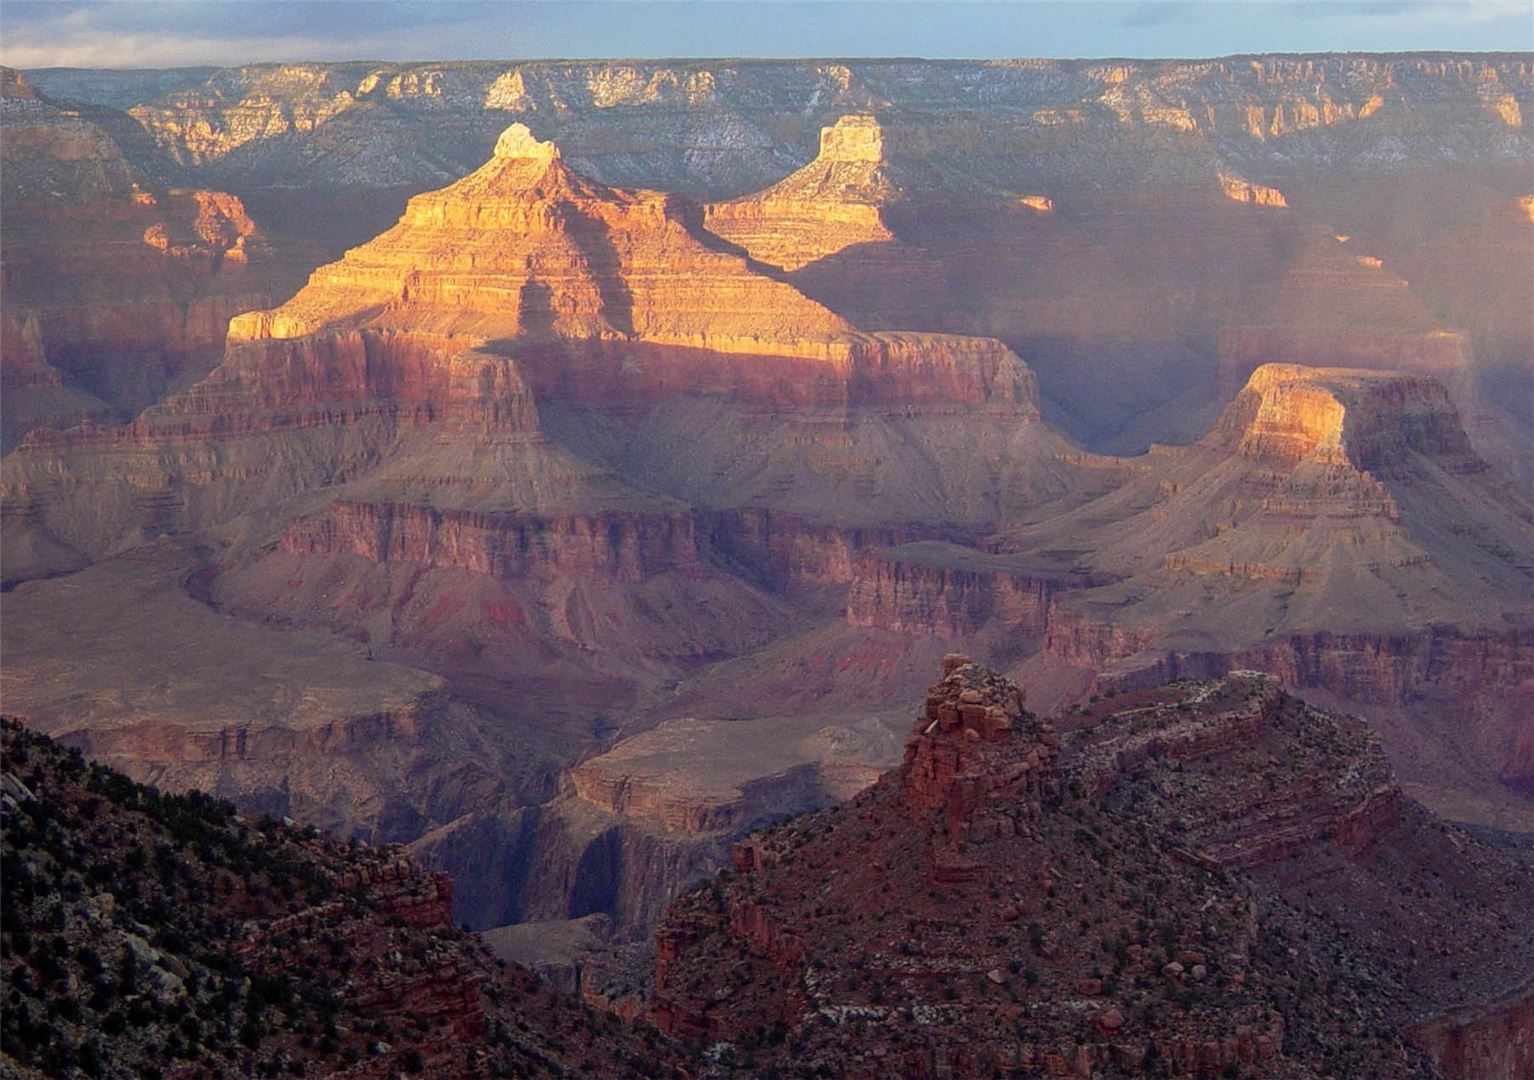 America’s National Parks Could See Increase in Entrance Fees